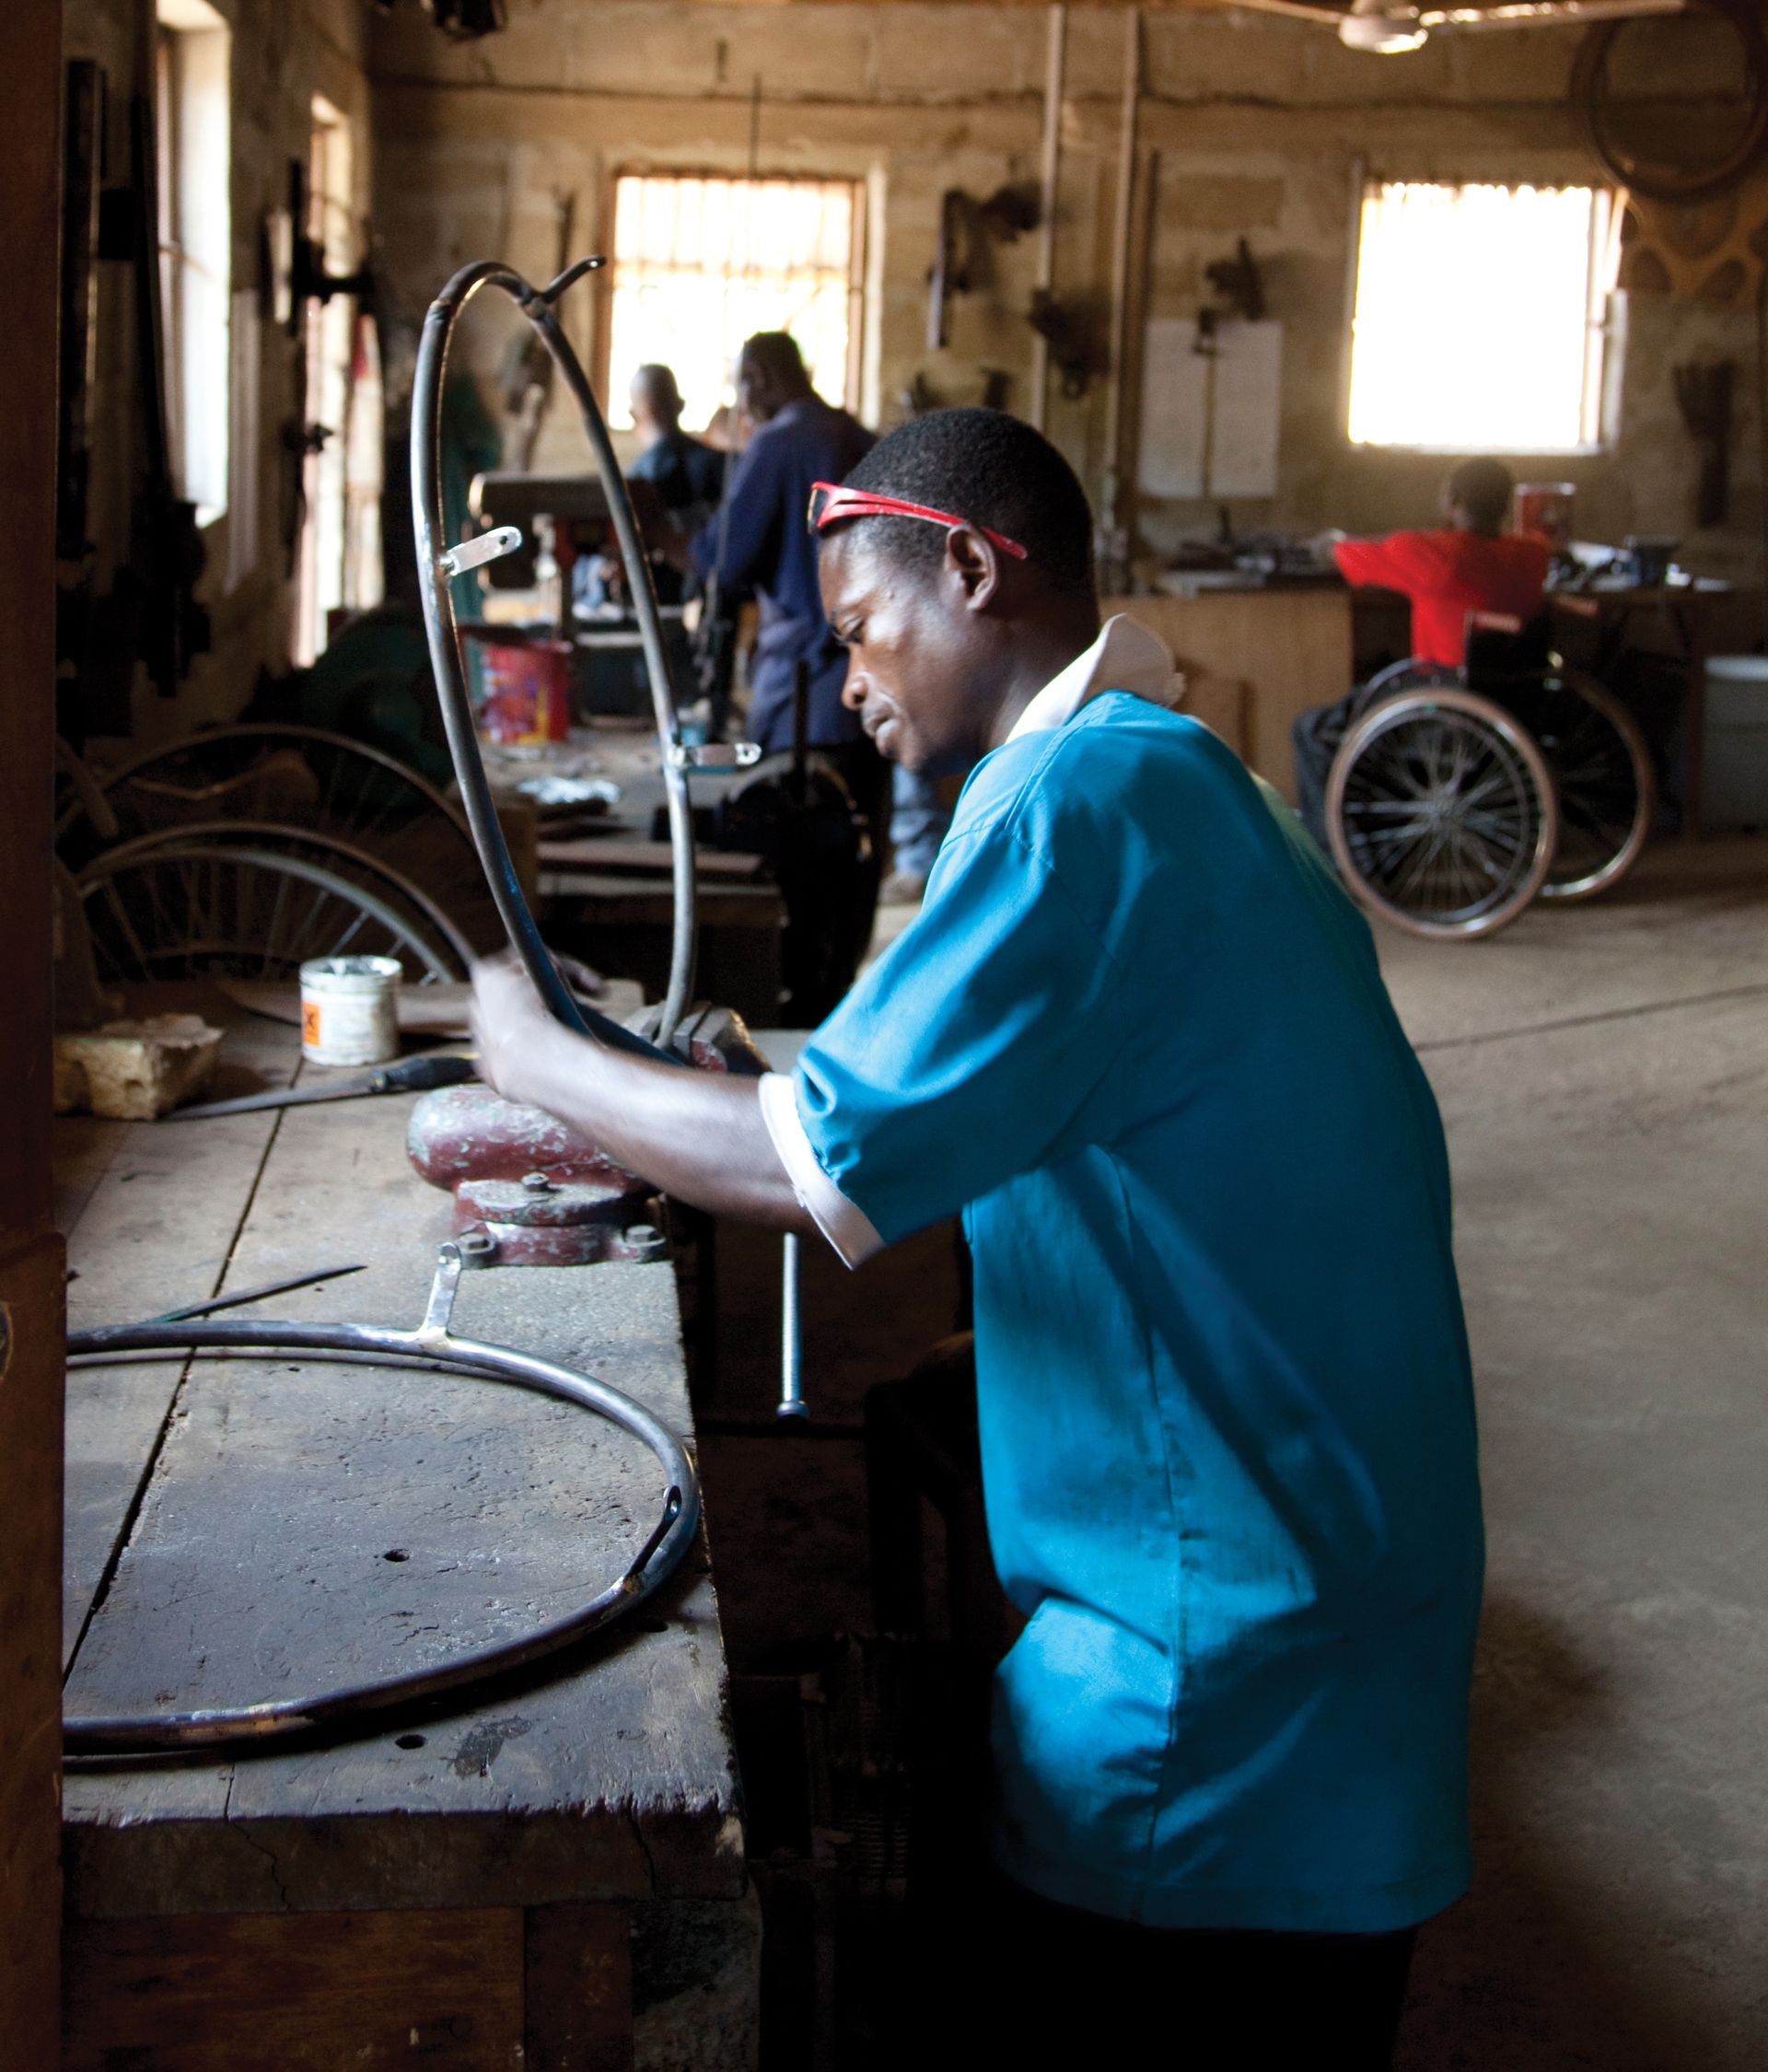 An African man standing in a workshop and repairing a round black wheelchair part with other men nearby.